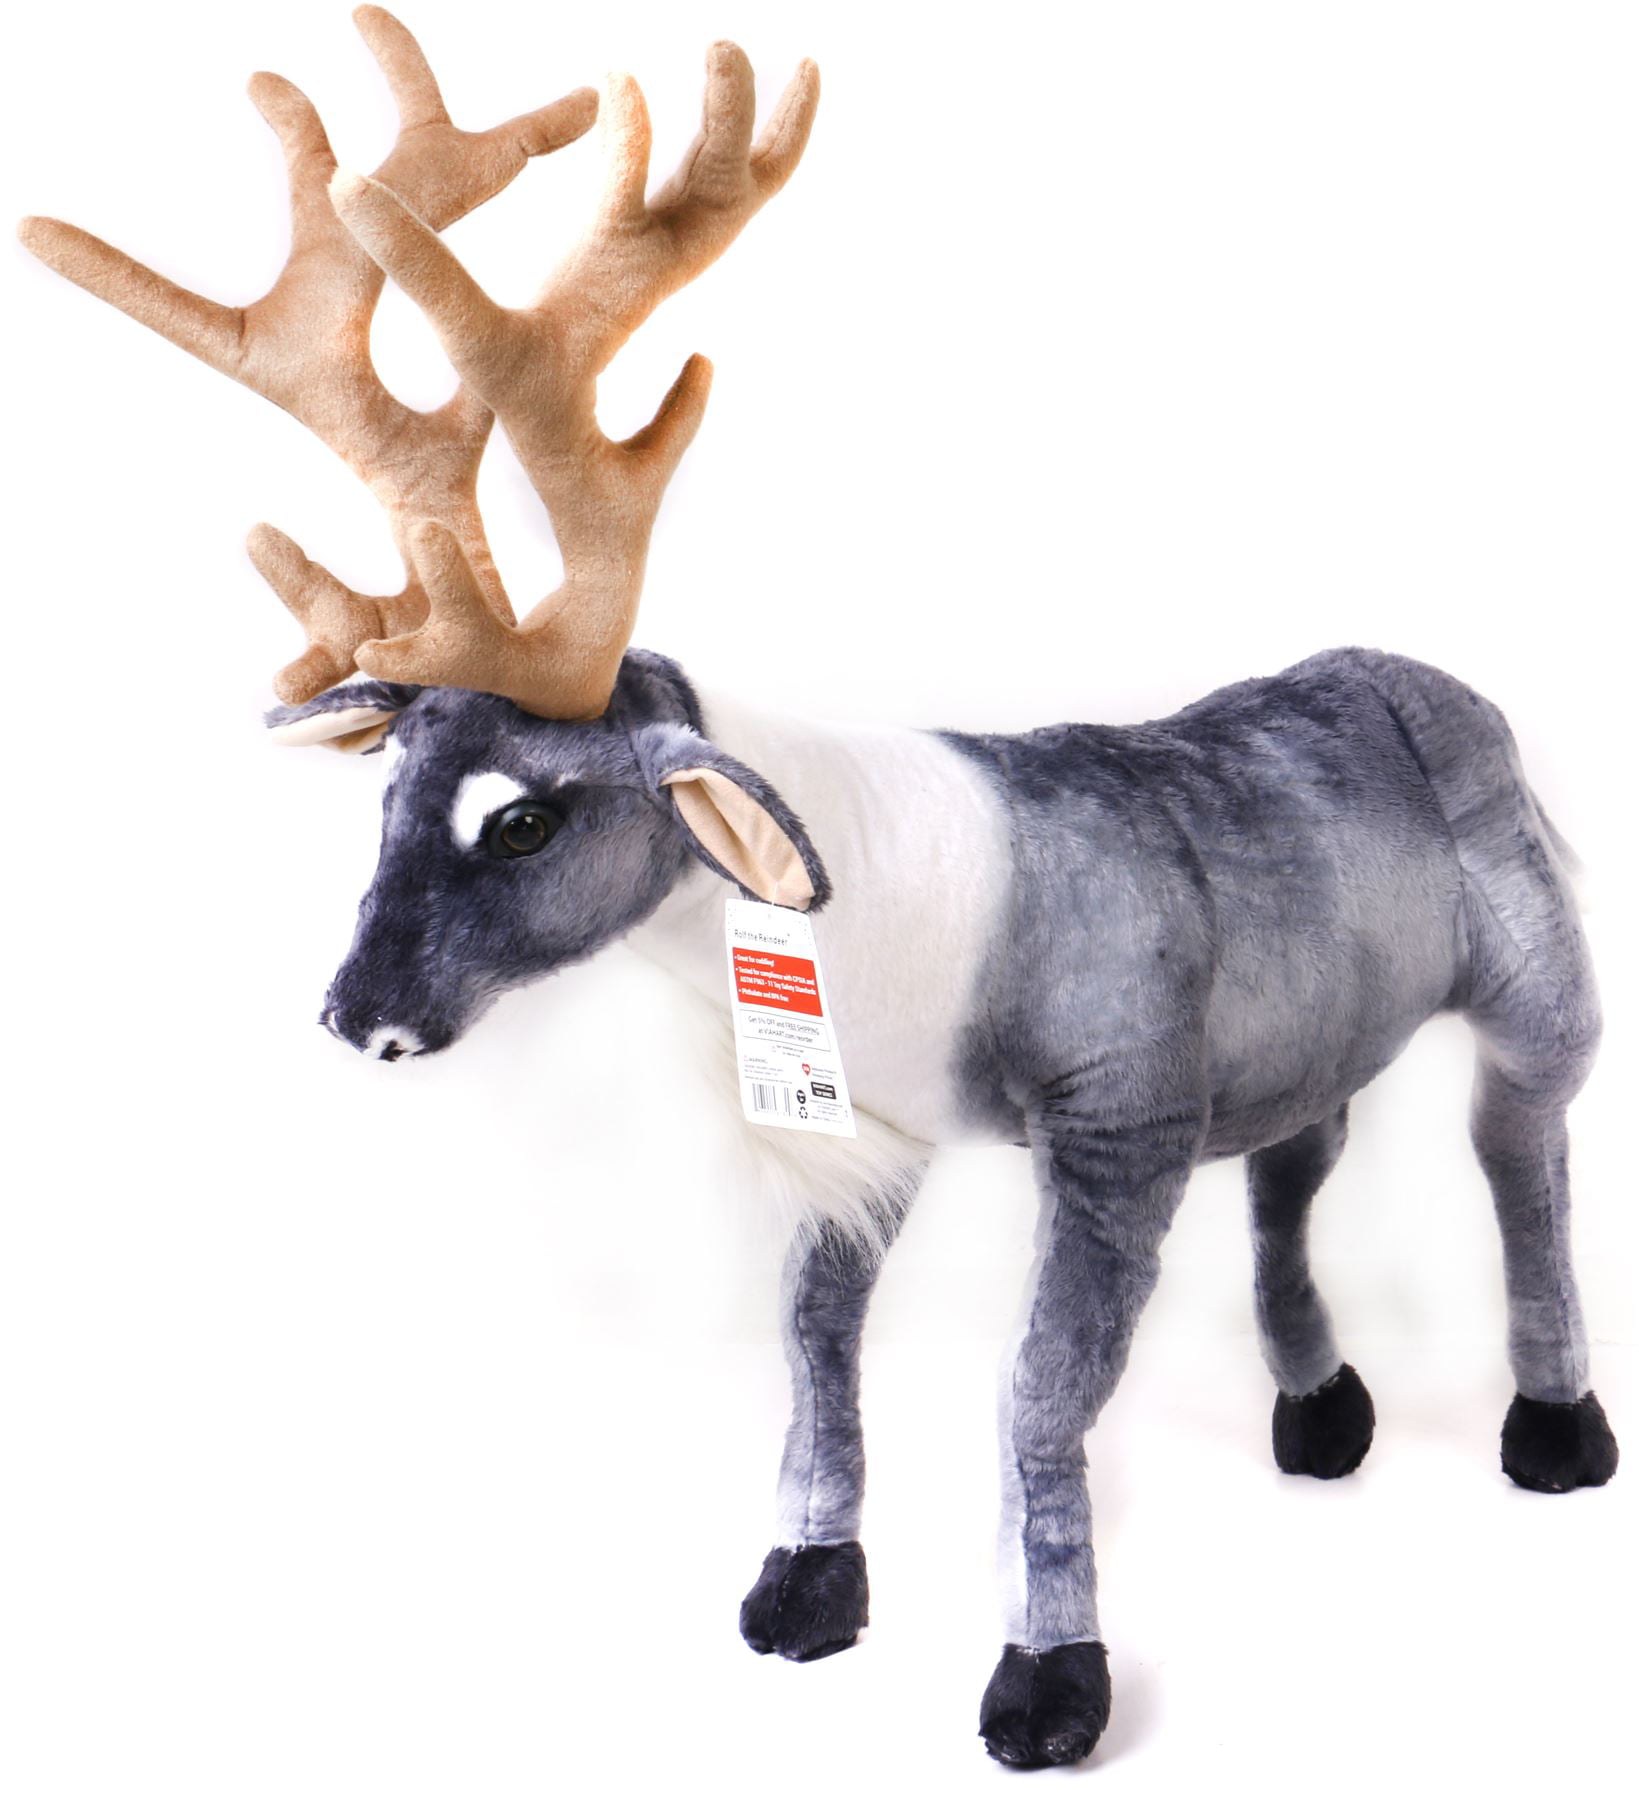 Rolf the Reindeer | 3 Foot Big Stuffed Animal Plush Caribou Sleigh Deer |  Shipping from Texas | By Tiger Tale Toys 